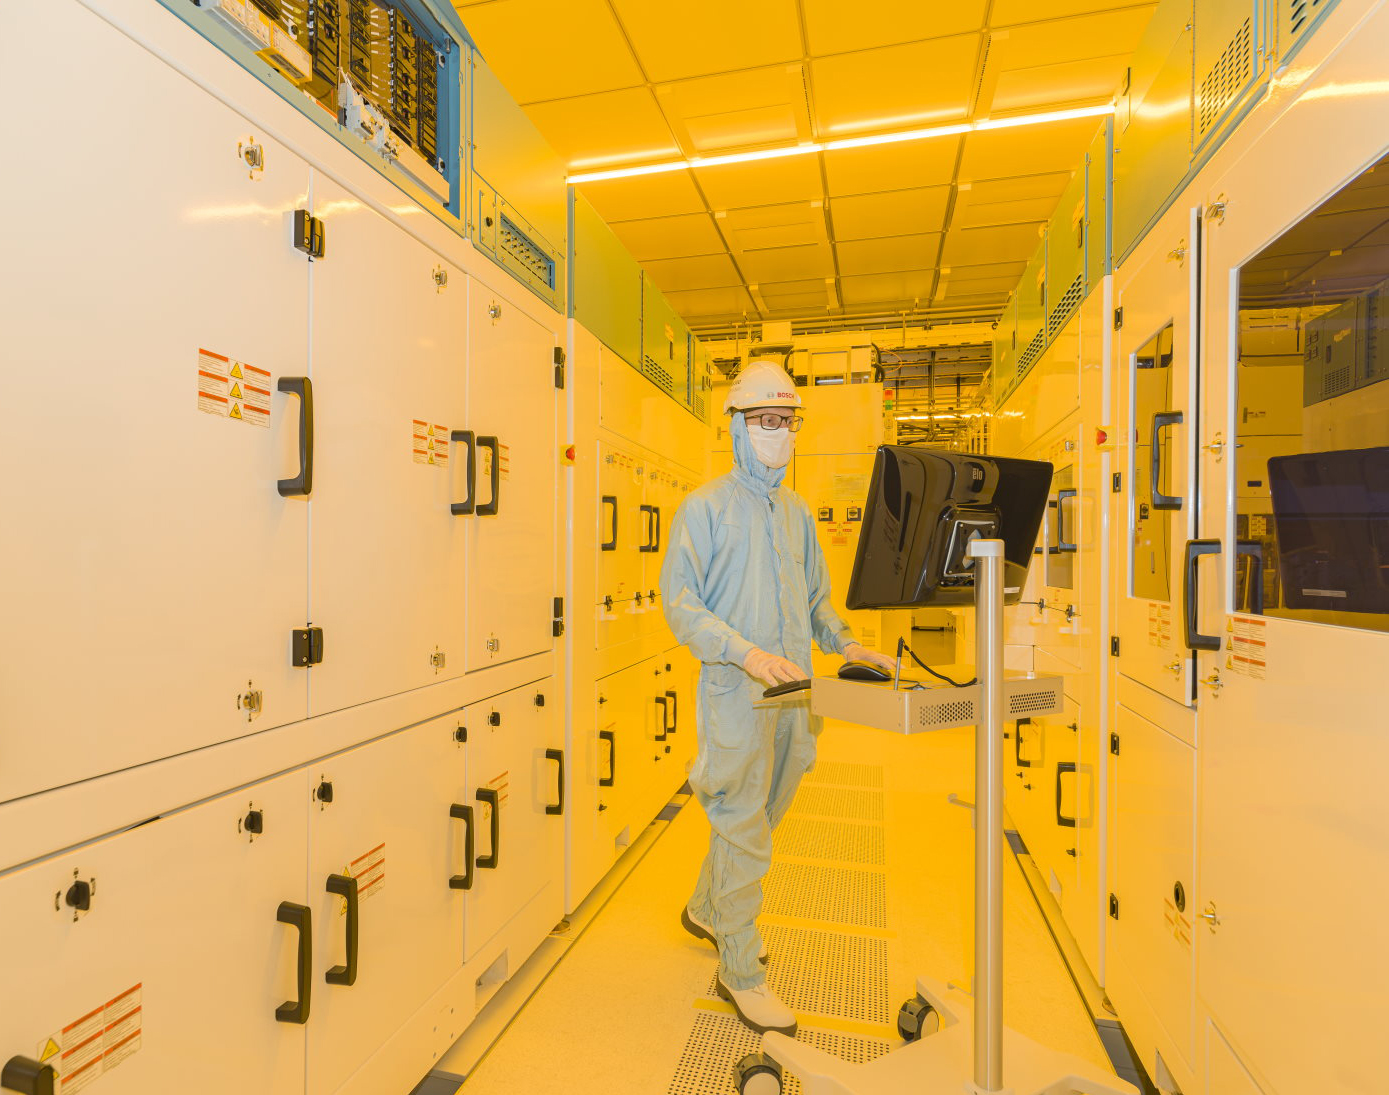 Bosch semiconductor manufacturing in Dresden